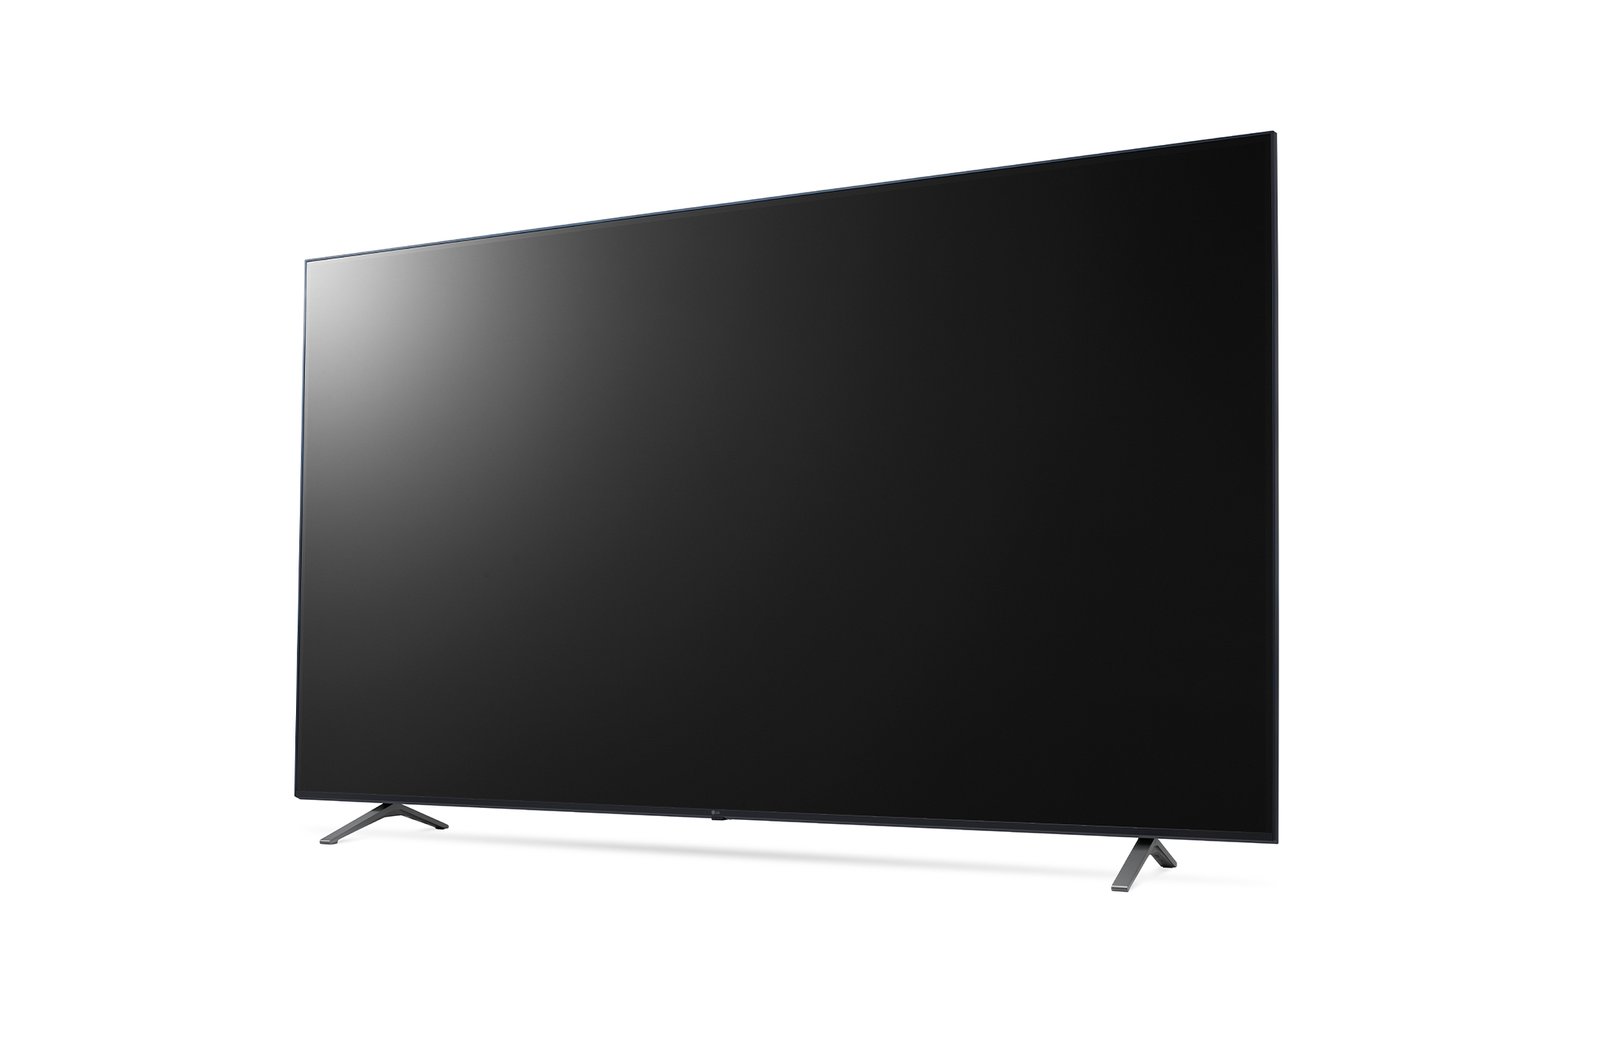 LG Commercial T V 86UR640 (86" Display UHD || SuperSign Control || Ethernet || Wifi || CMS Compatibility || DVB-T2 || 3 Years )